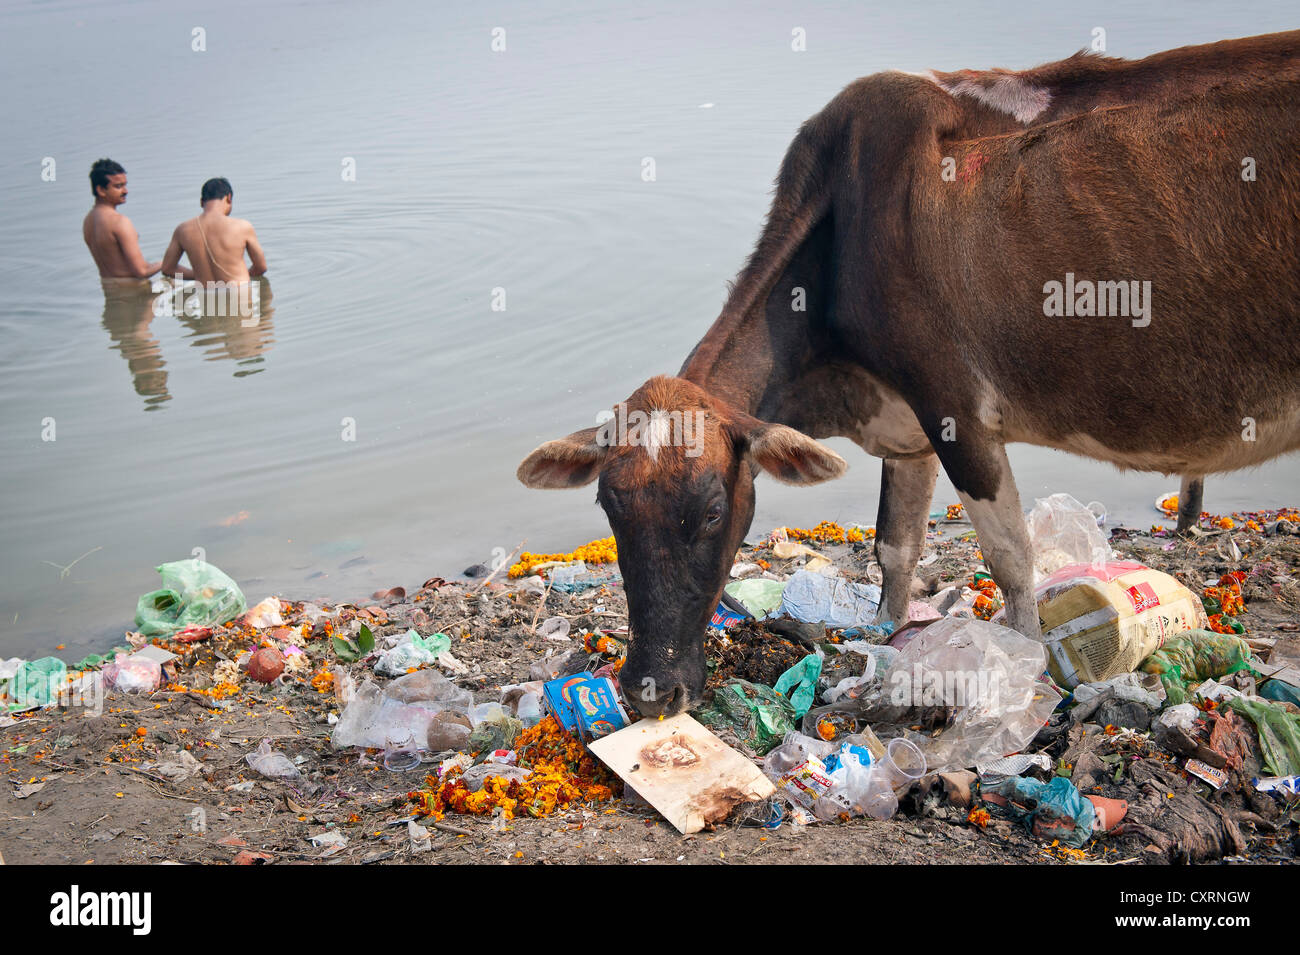 Two men bathing whilst a holy cow is eating from garbage, banks of the Ganges, Varanasi, Benares or Kashi, Uttar Pradesh, India Stock Photo